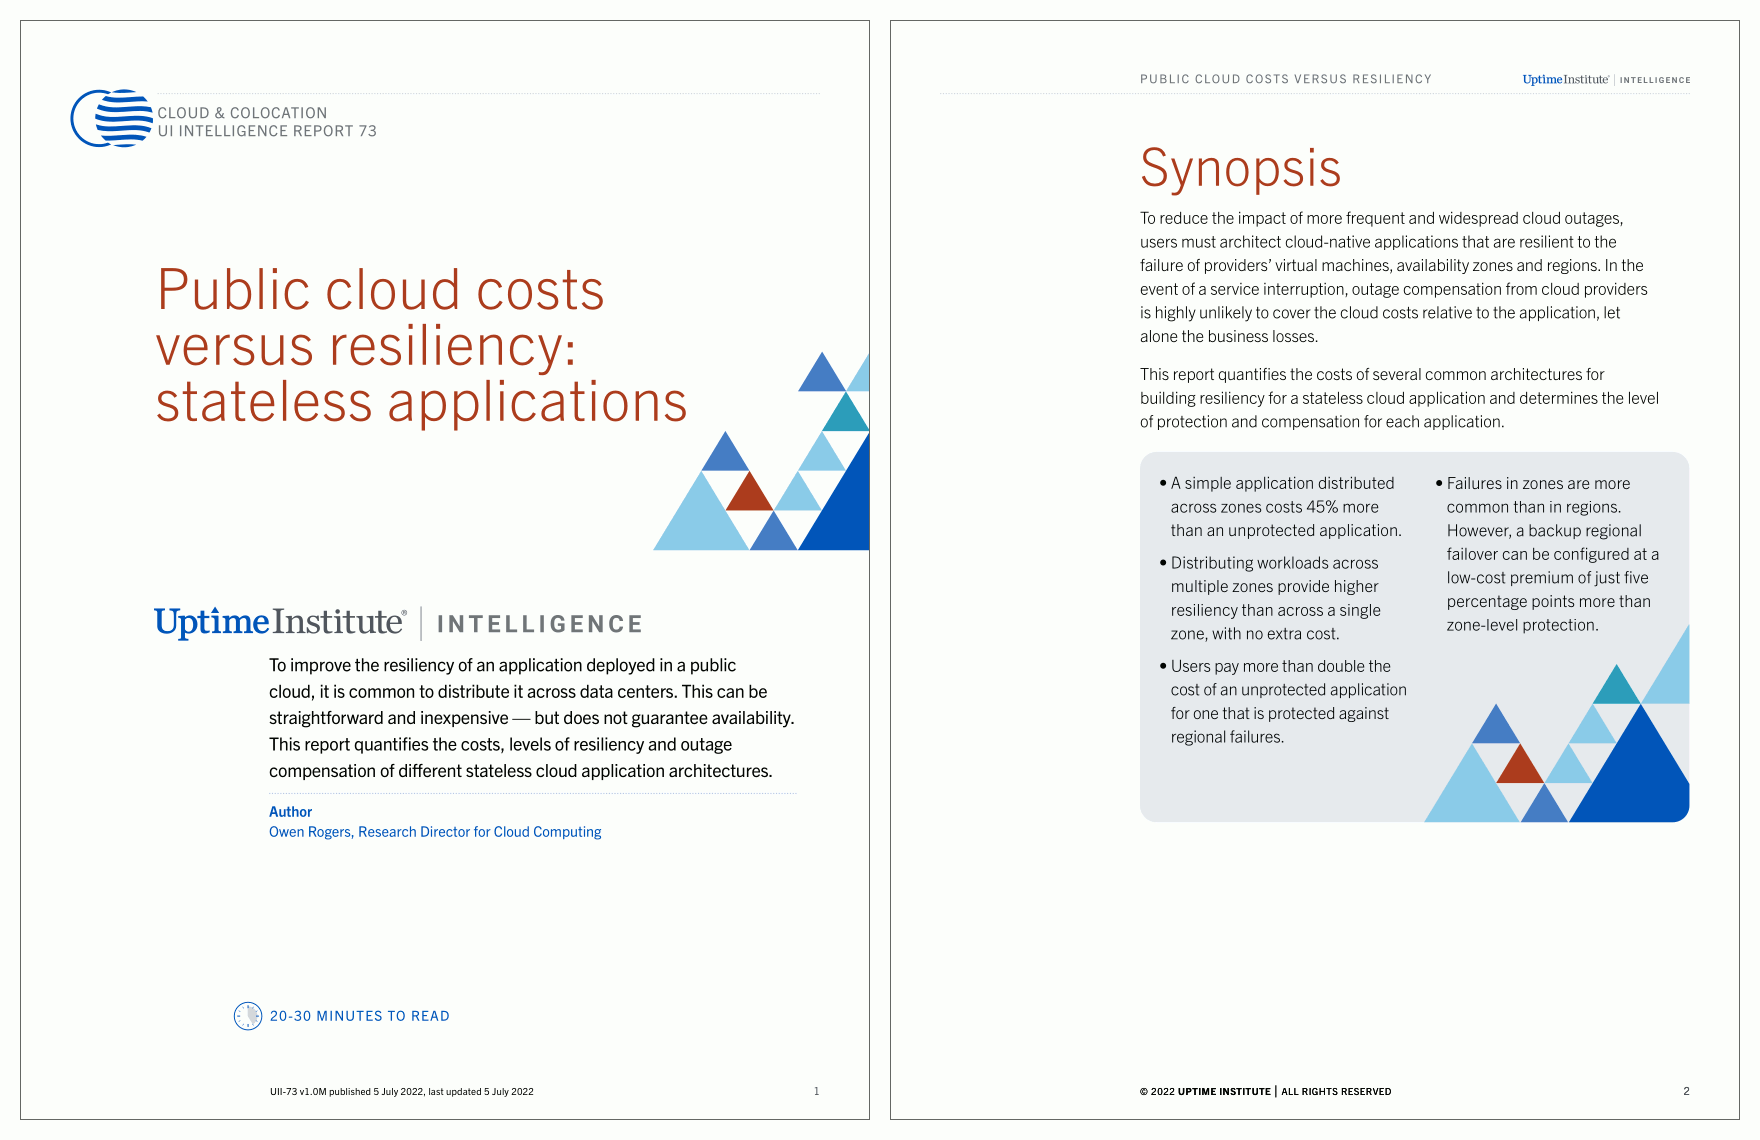 uptime-institute-intelligence_public-cloud-costs-versus-resiliency-report_preview.gif